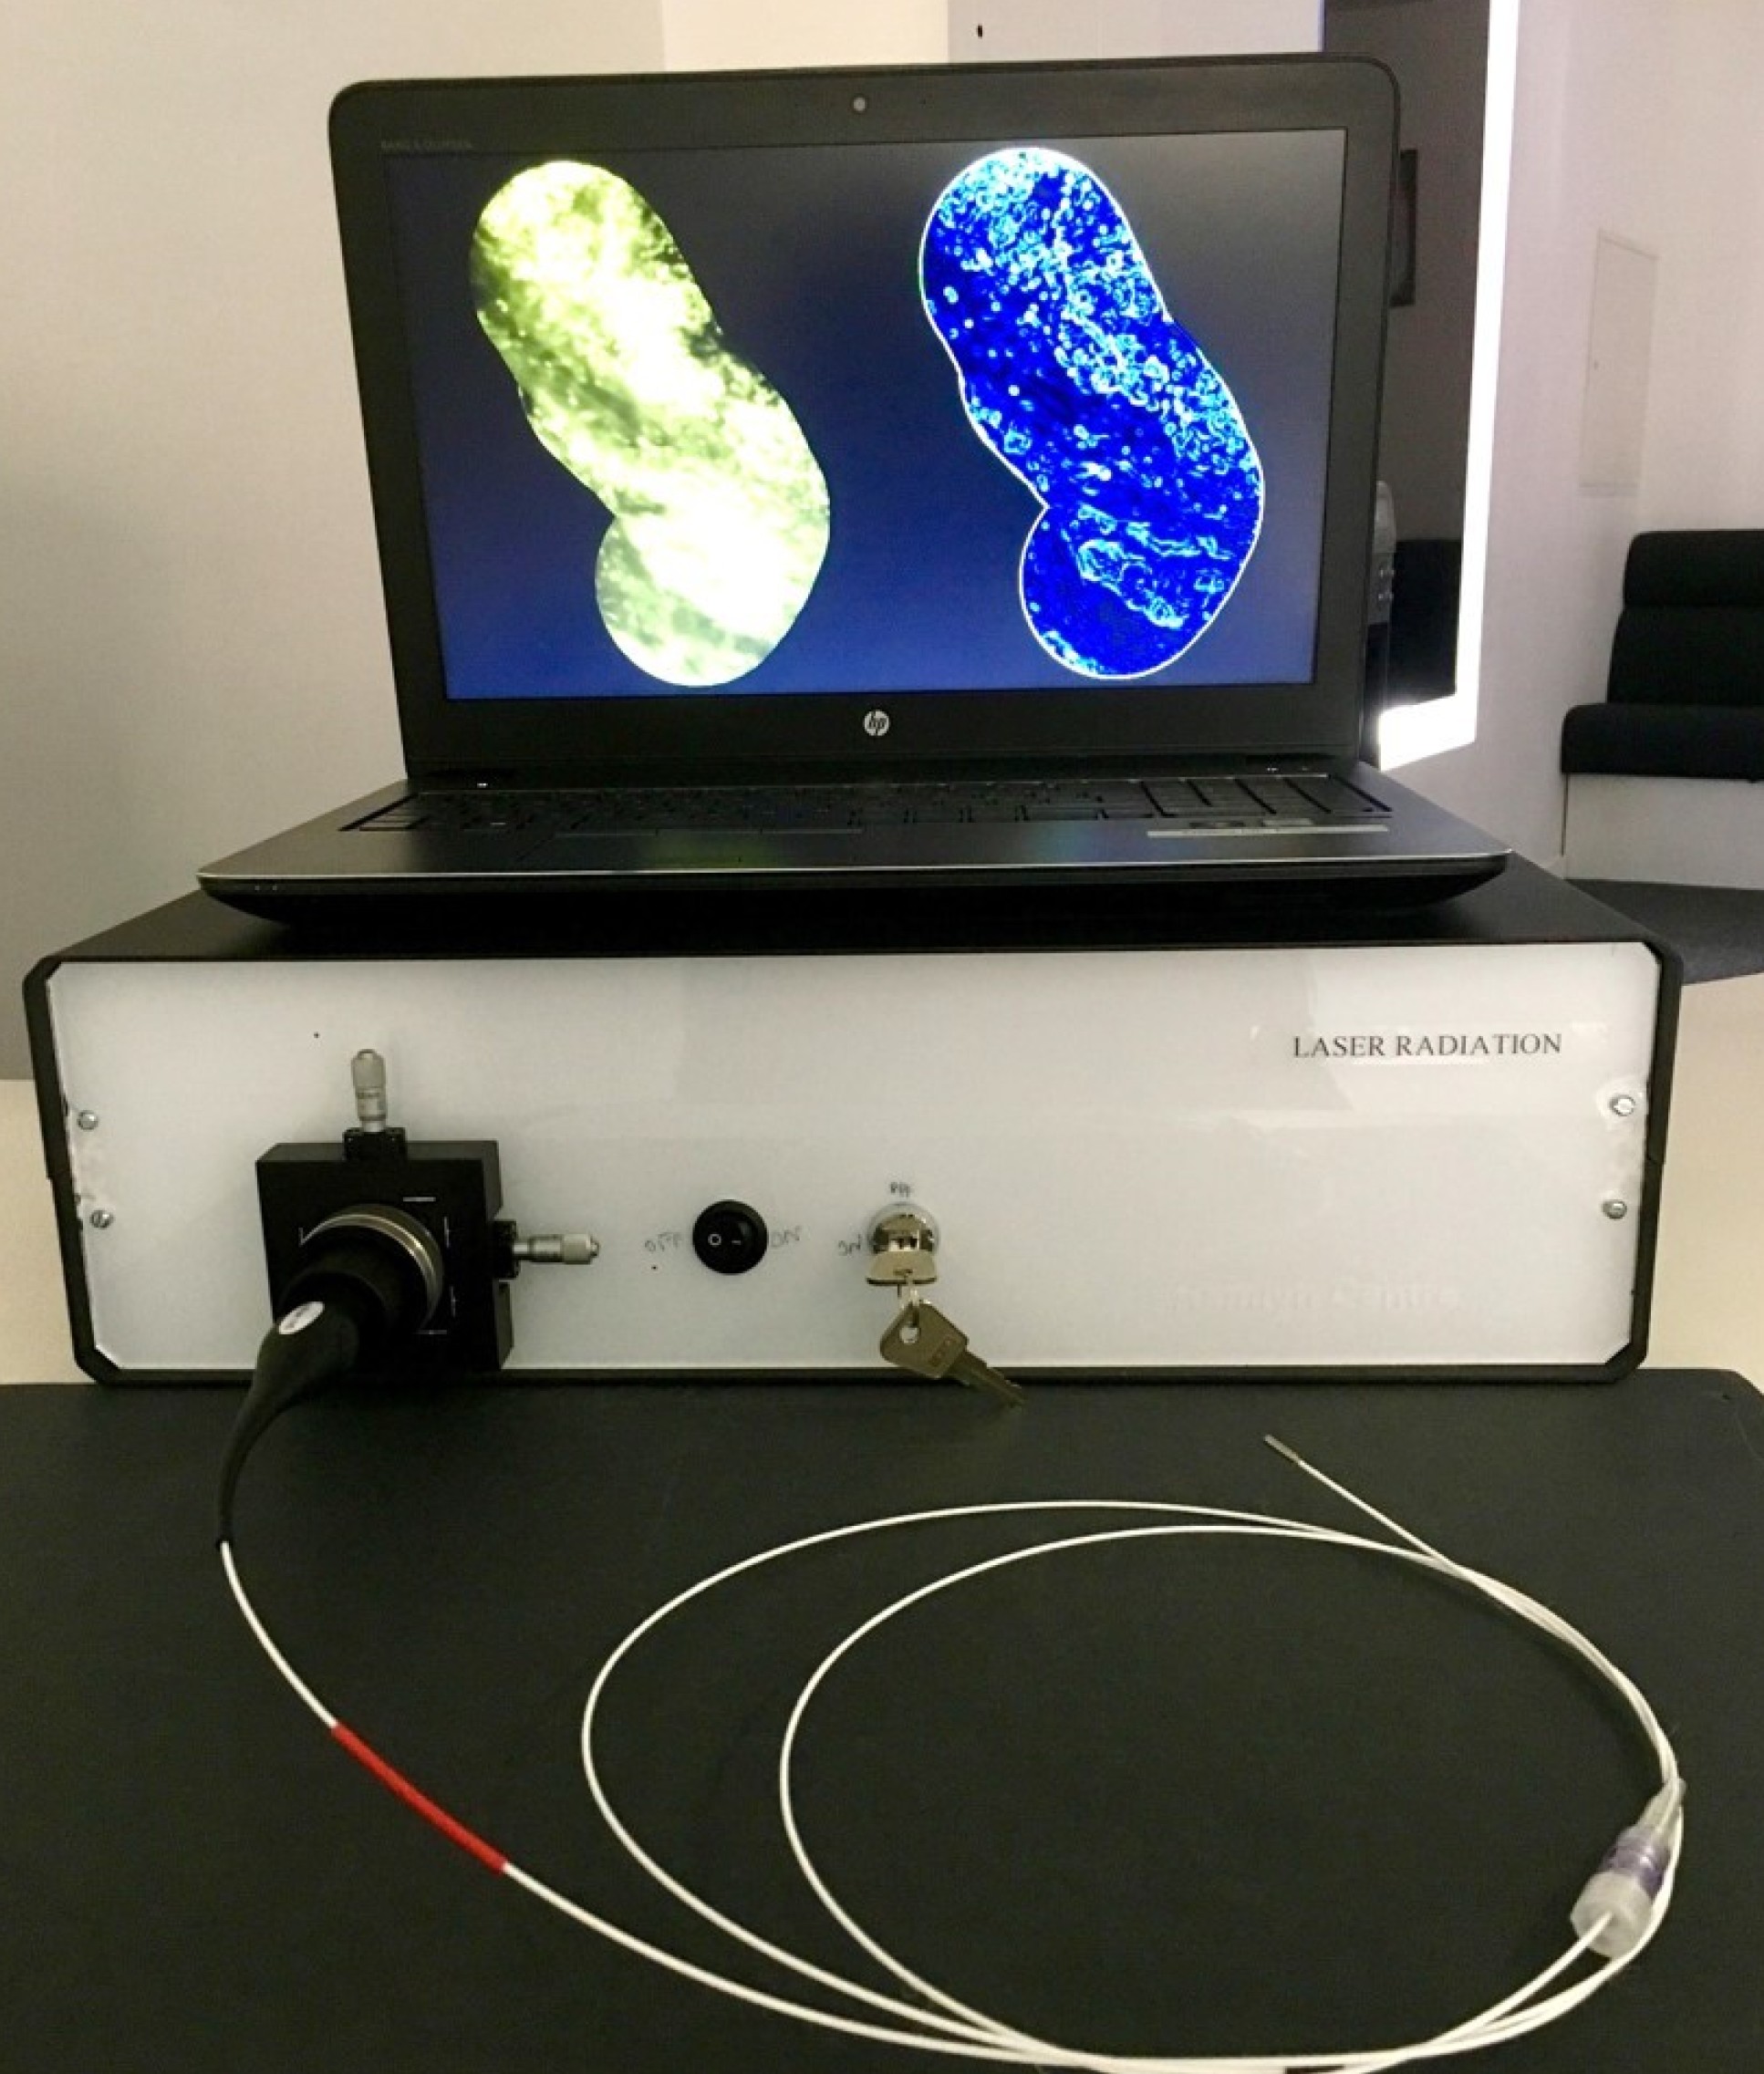 Photo showing images on a screen taken by the microscope